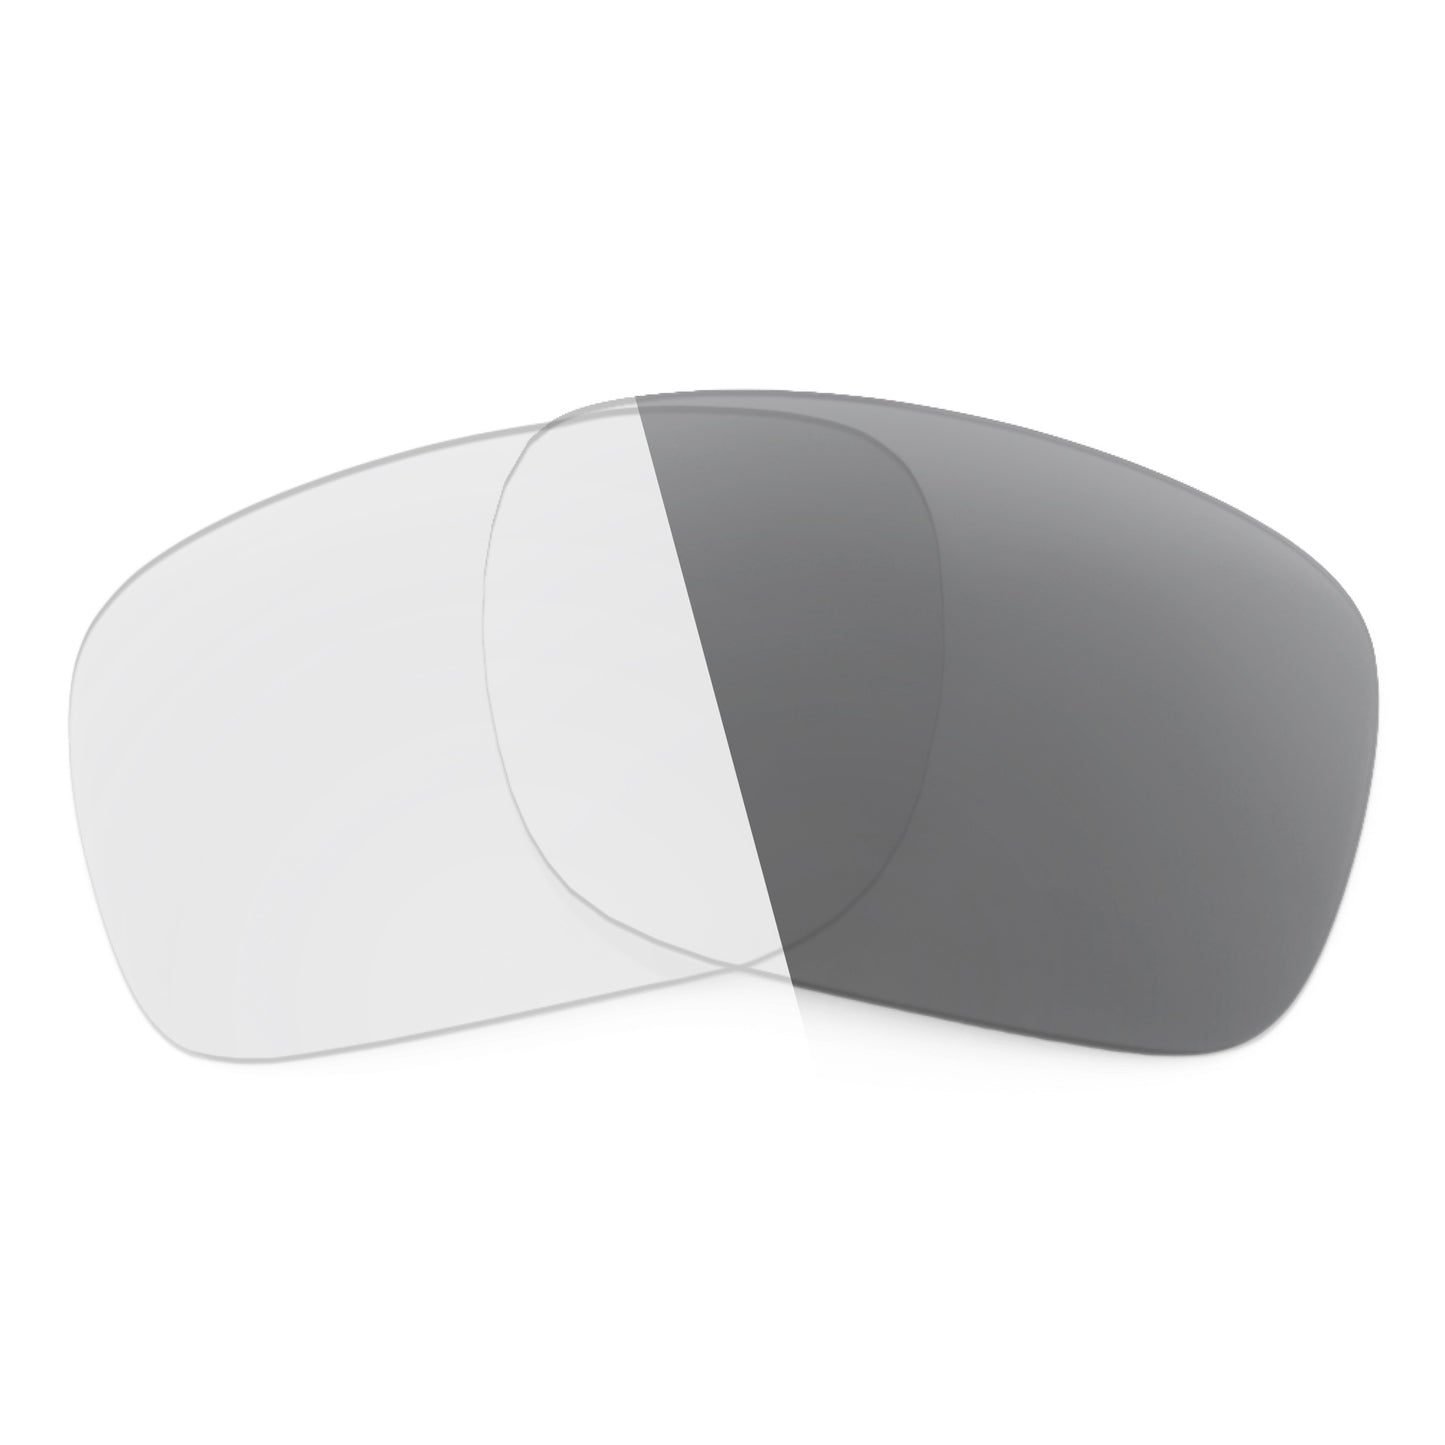 Revant replacement lenses for Ray-Ban RB4214 59mm Non-Polarized Adapt Gray Photochromic